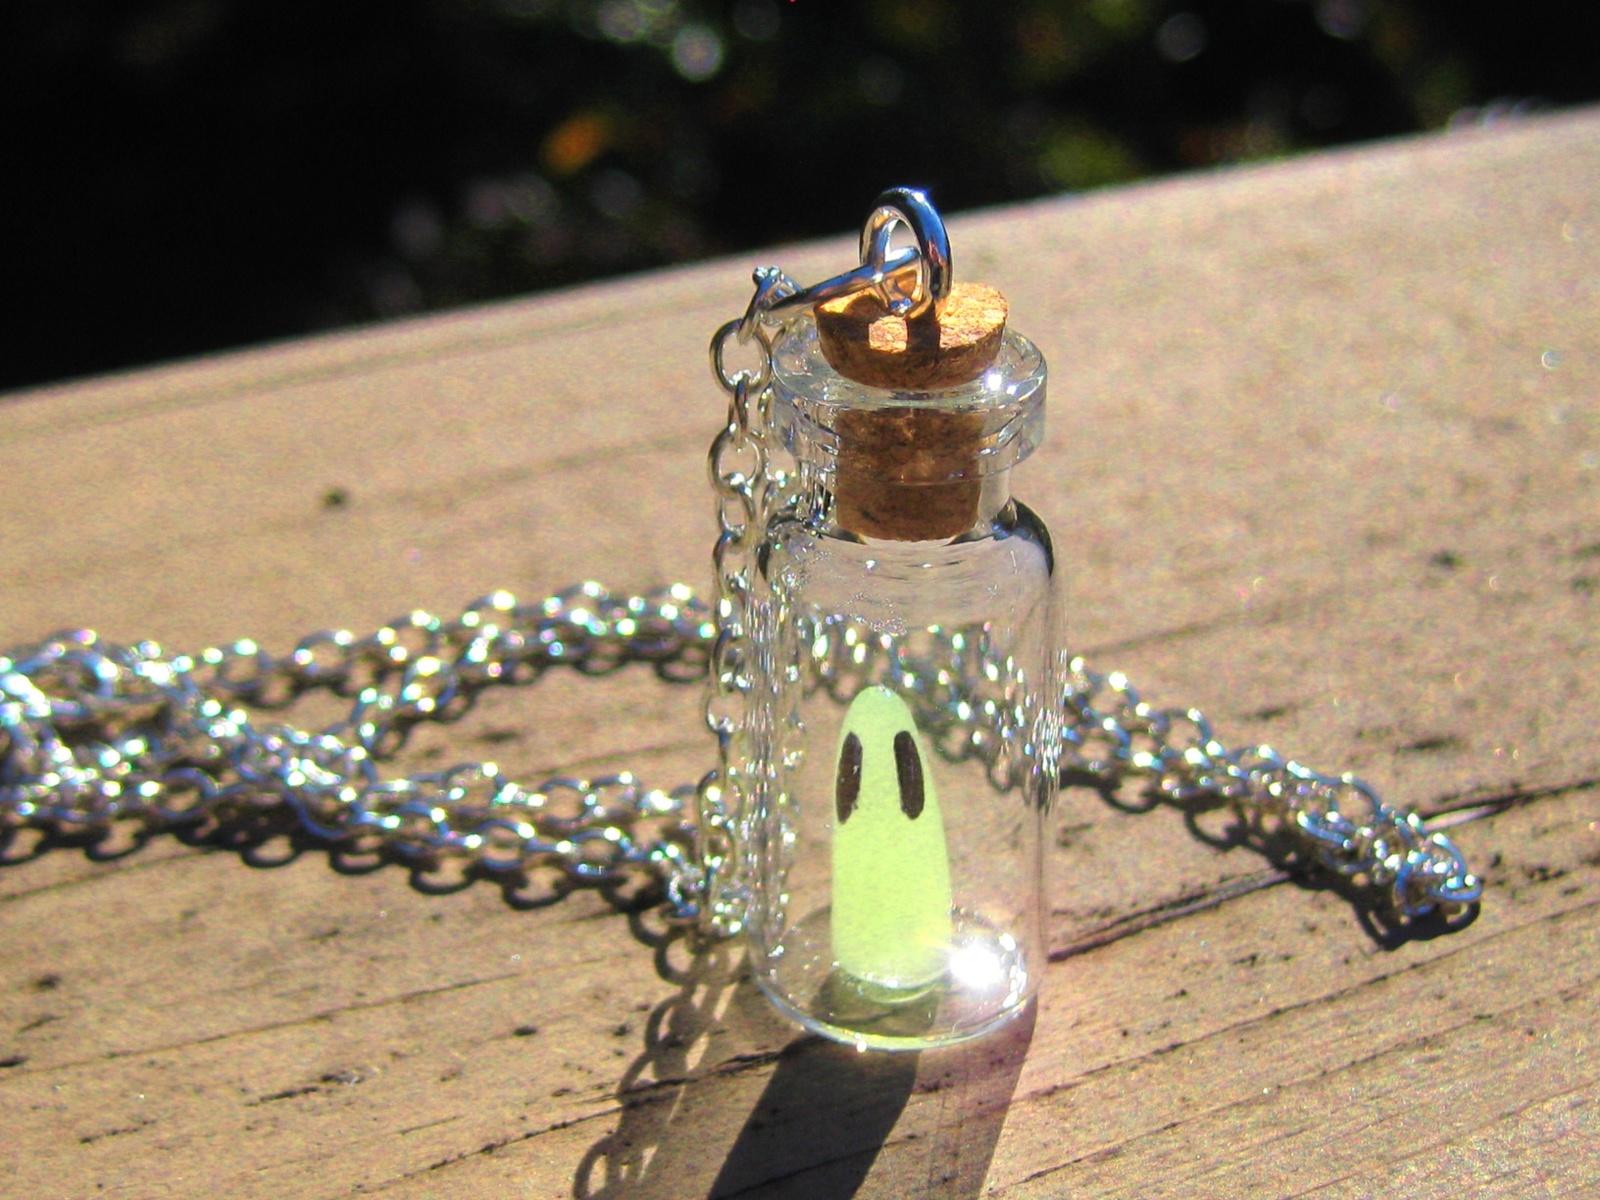 ADOPT A GHOST SPIRIT IN A BOTTLE FREE WITH 100.00 PURCHASE - Freebie